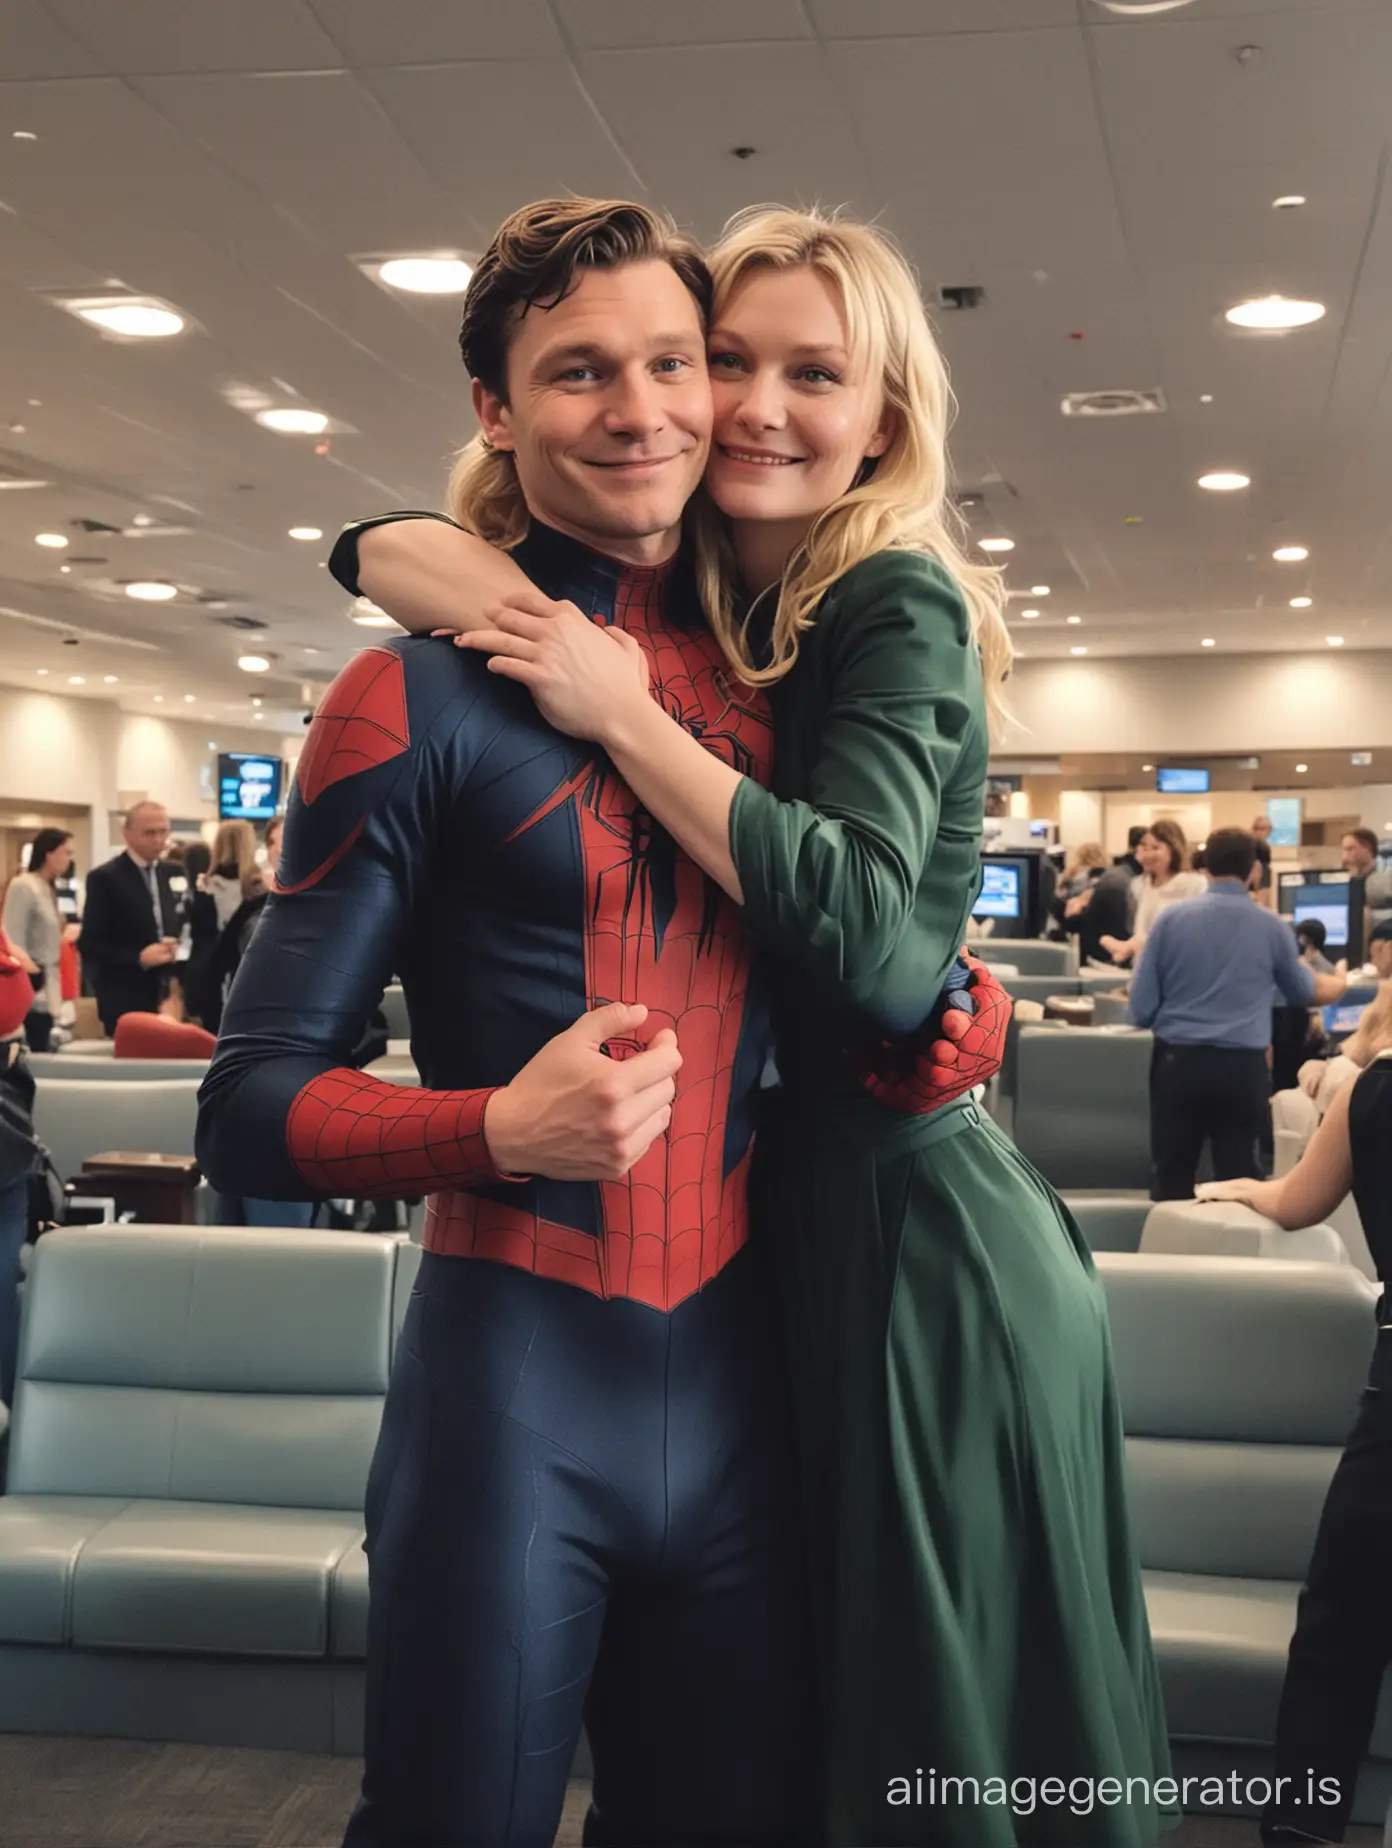 Kirsten-Dunst-and-Spiderman-Embrace-Happily-Under-Airport-Lounge-Security-Camera